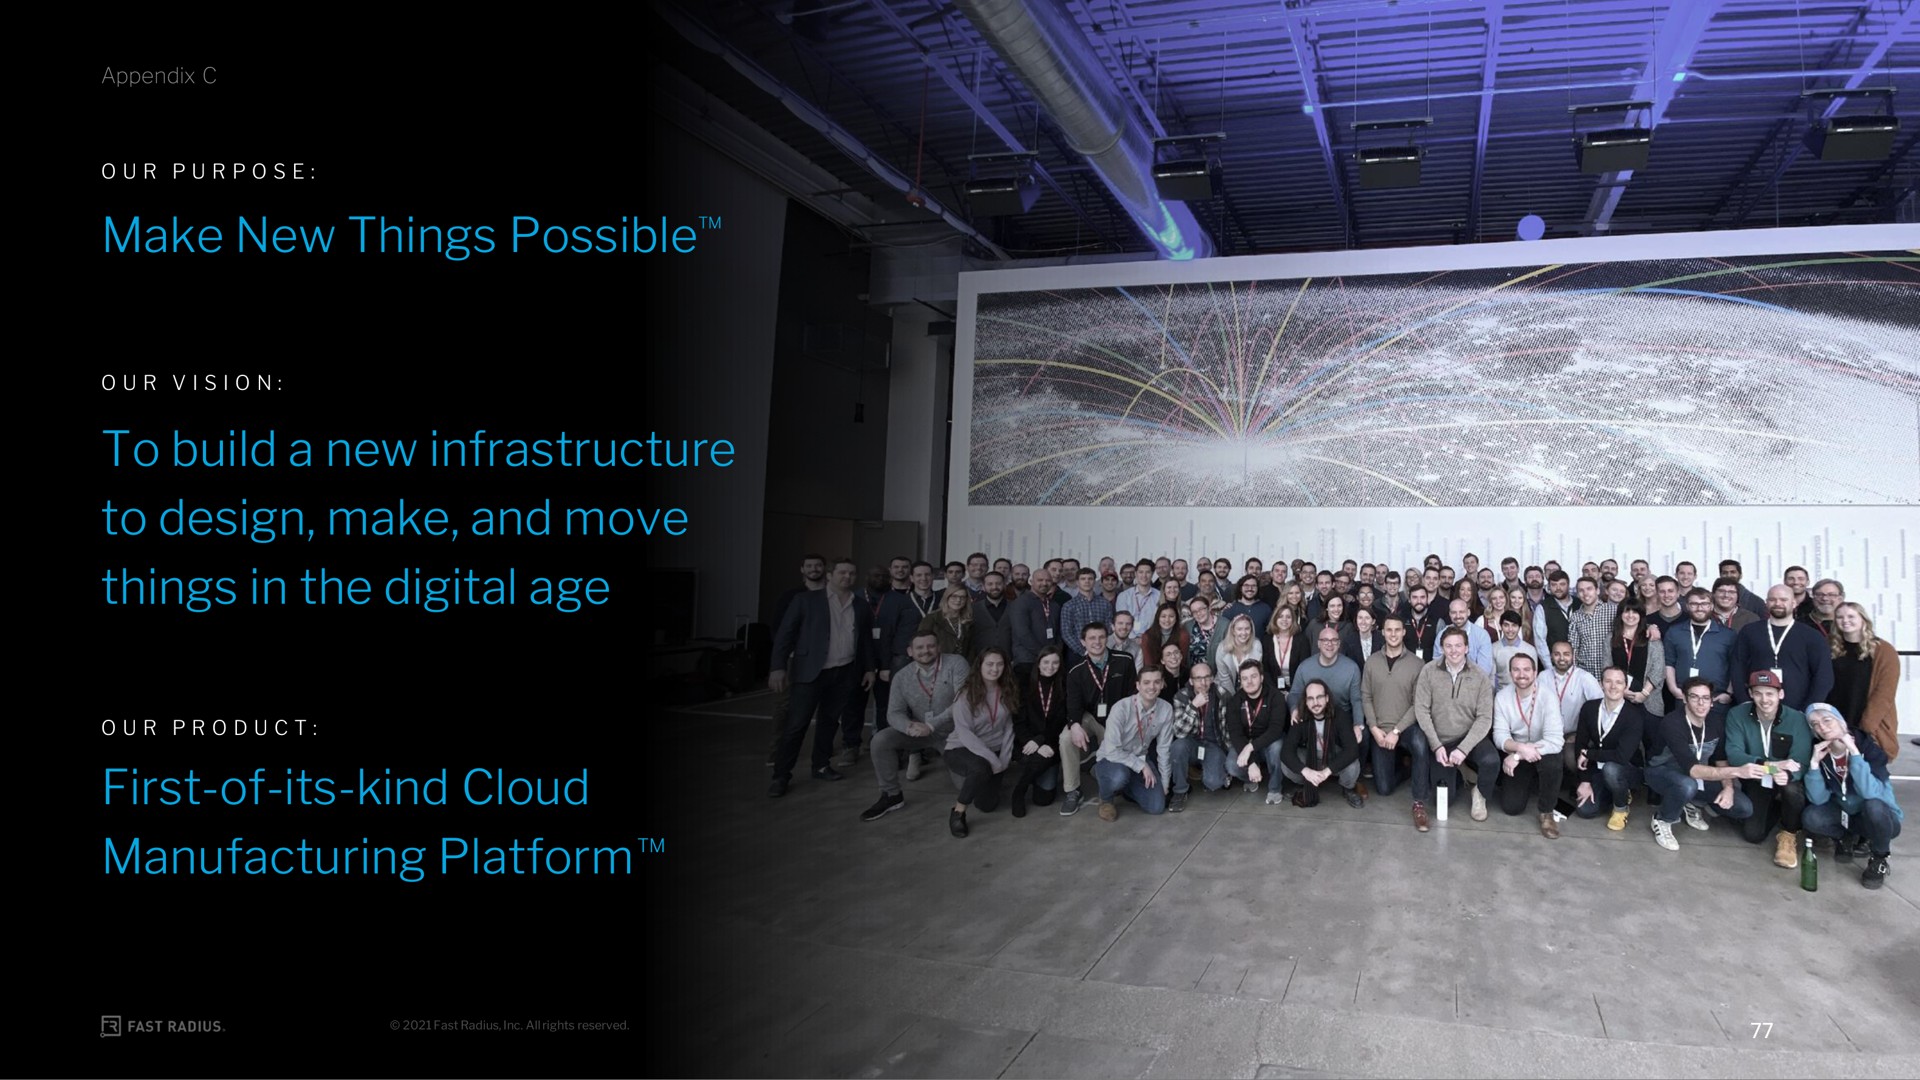 make new things to build a new infrastructure to design make and move things in the digital age first of its kind cloud manufacturing platform possible | Fast Radius